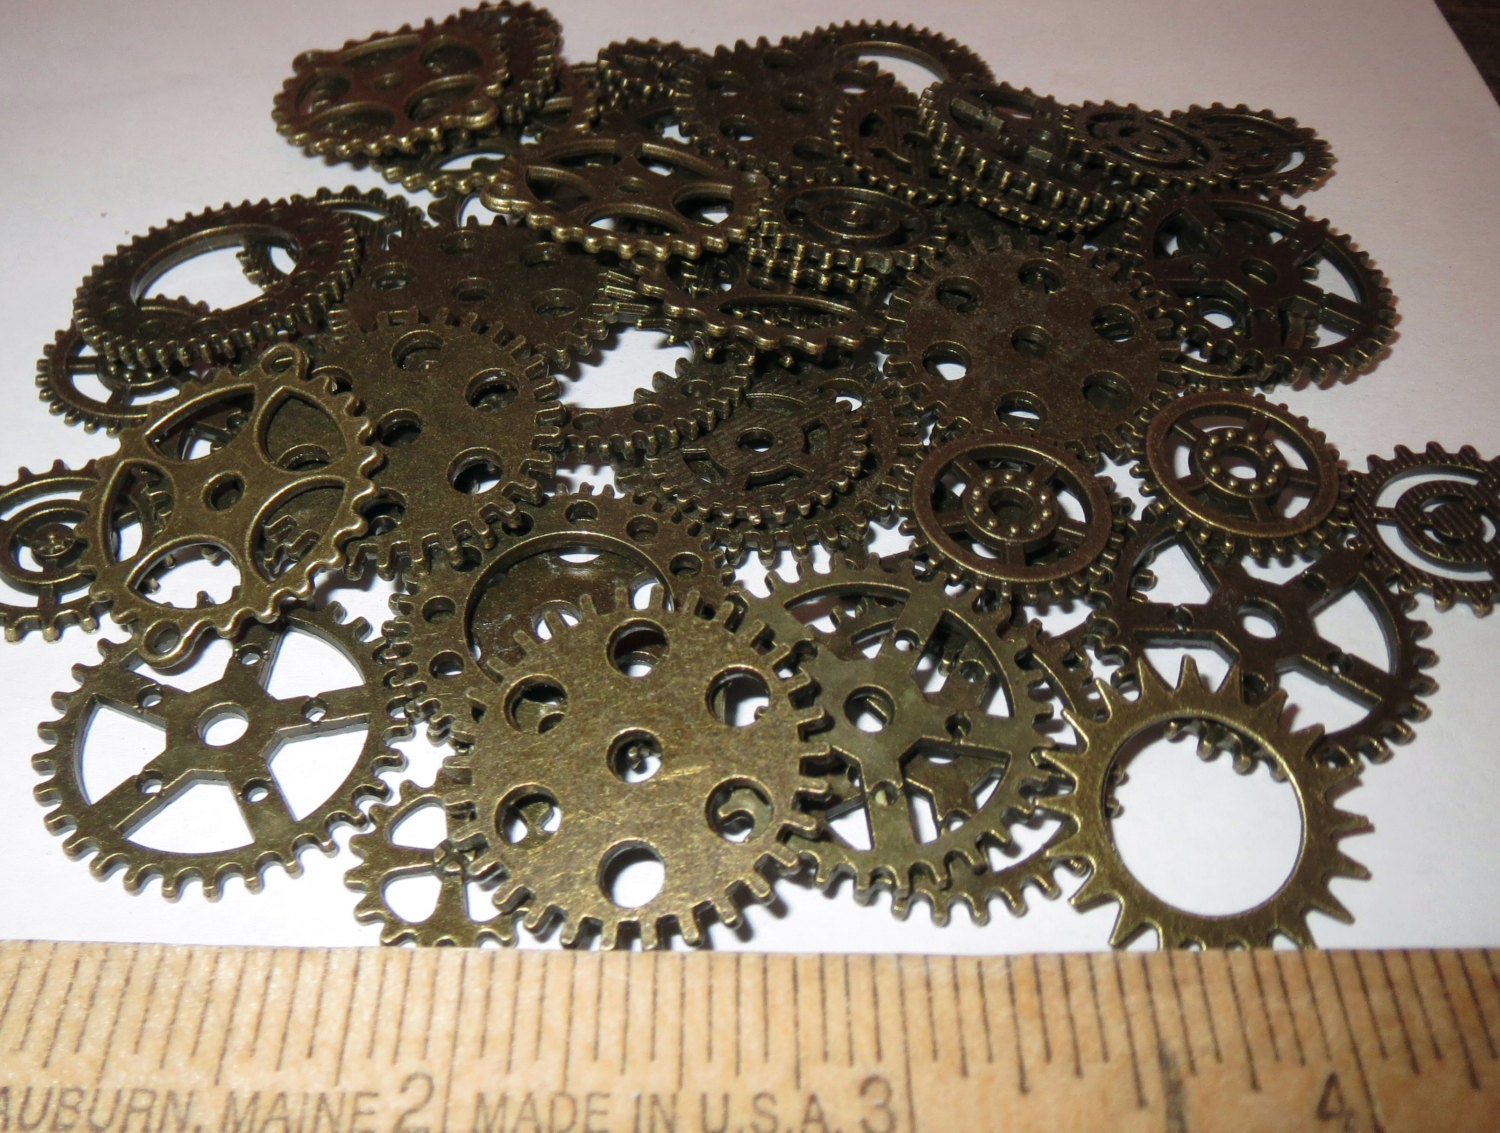 40g GEARS ONLY 1/2-1 Inch Medium to Large NeW CLoCK Watch Style STEAMPUNK Wheels Cogs Parts Pieces